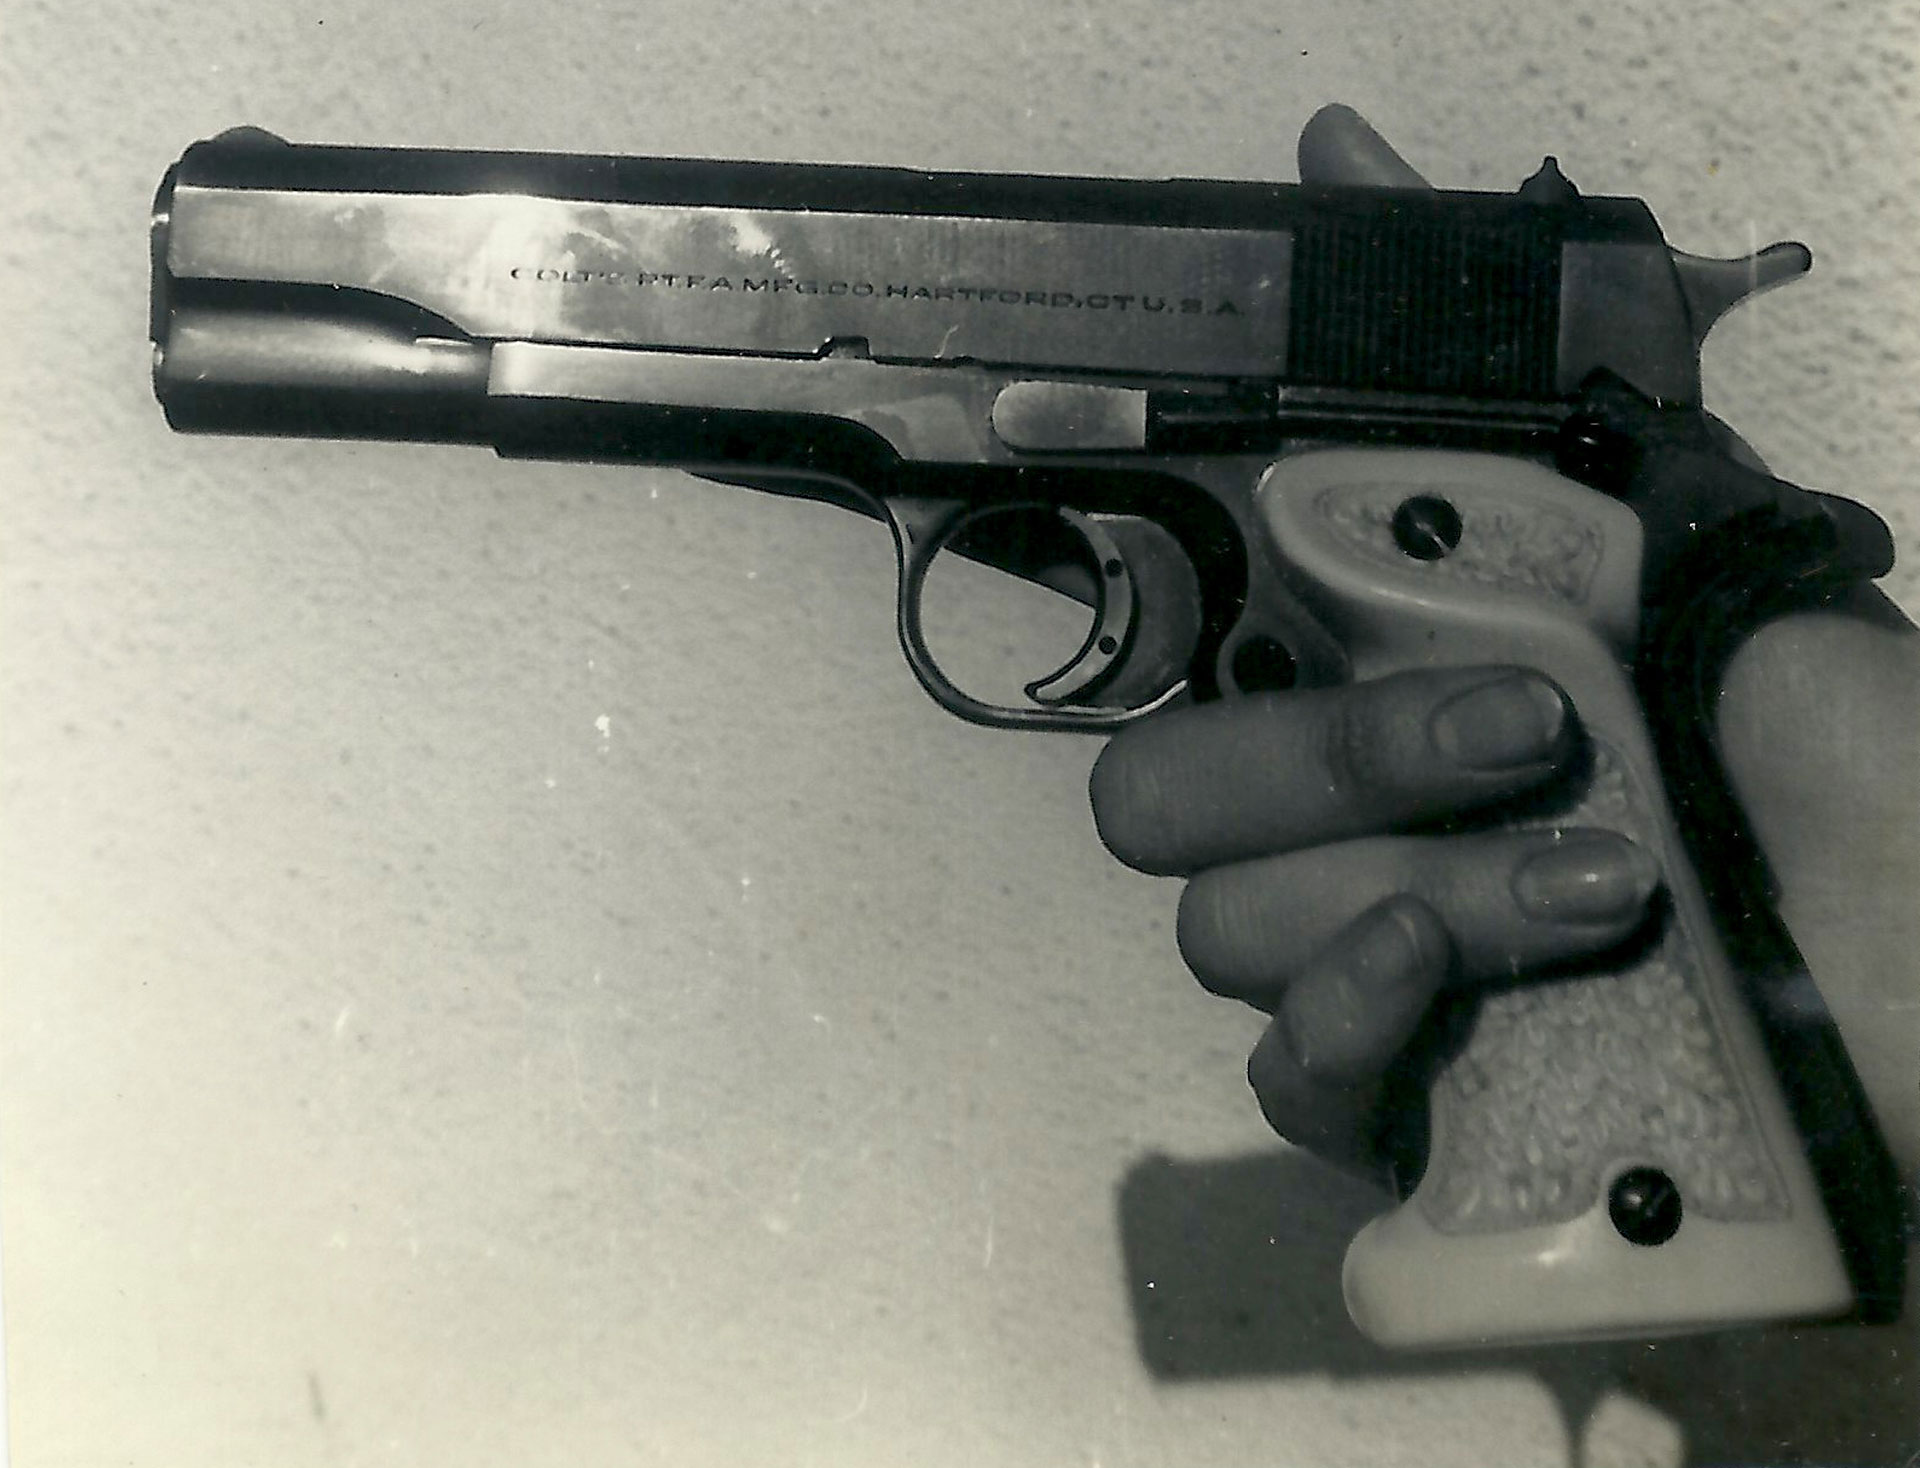 (Coates’ .45-cal. pistol) Although it is not fitted with ivory grips, Coates’ .45-cal. Colt pistol is of the type featured in his short story about a gun battle in the Mexican jungle.